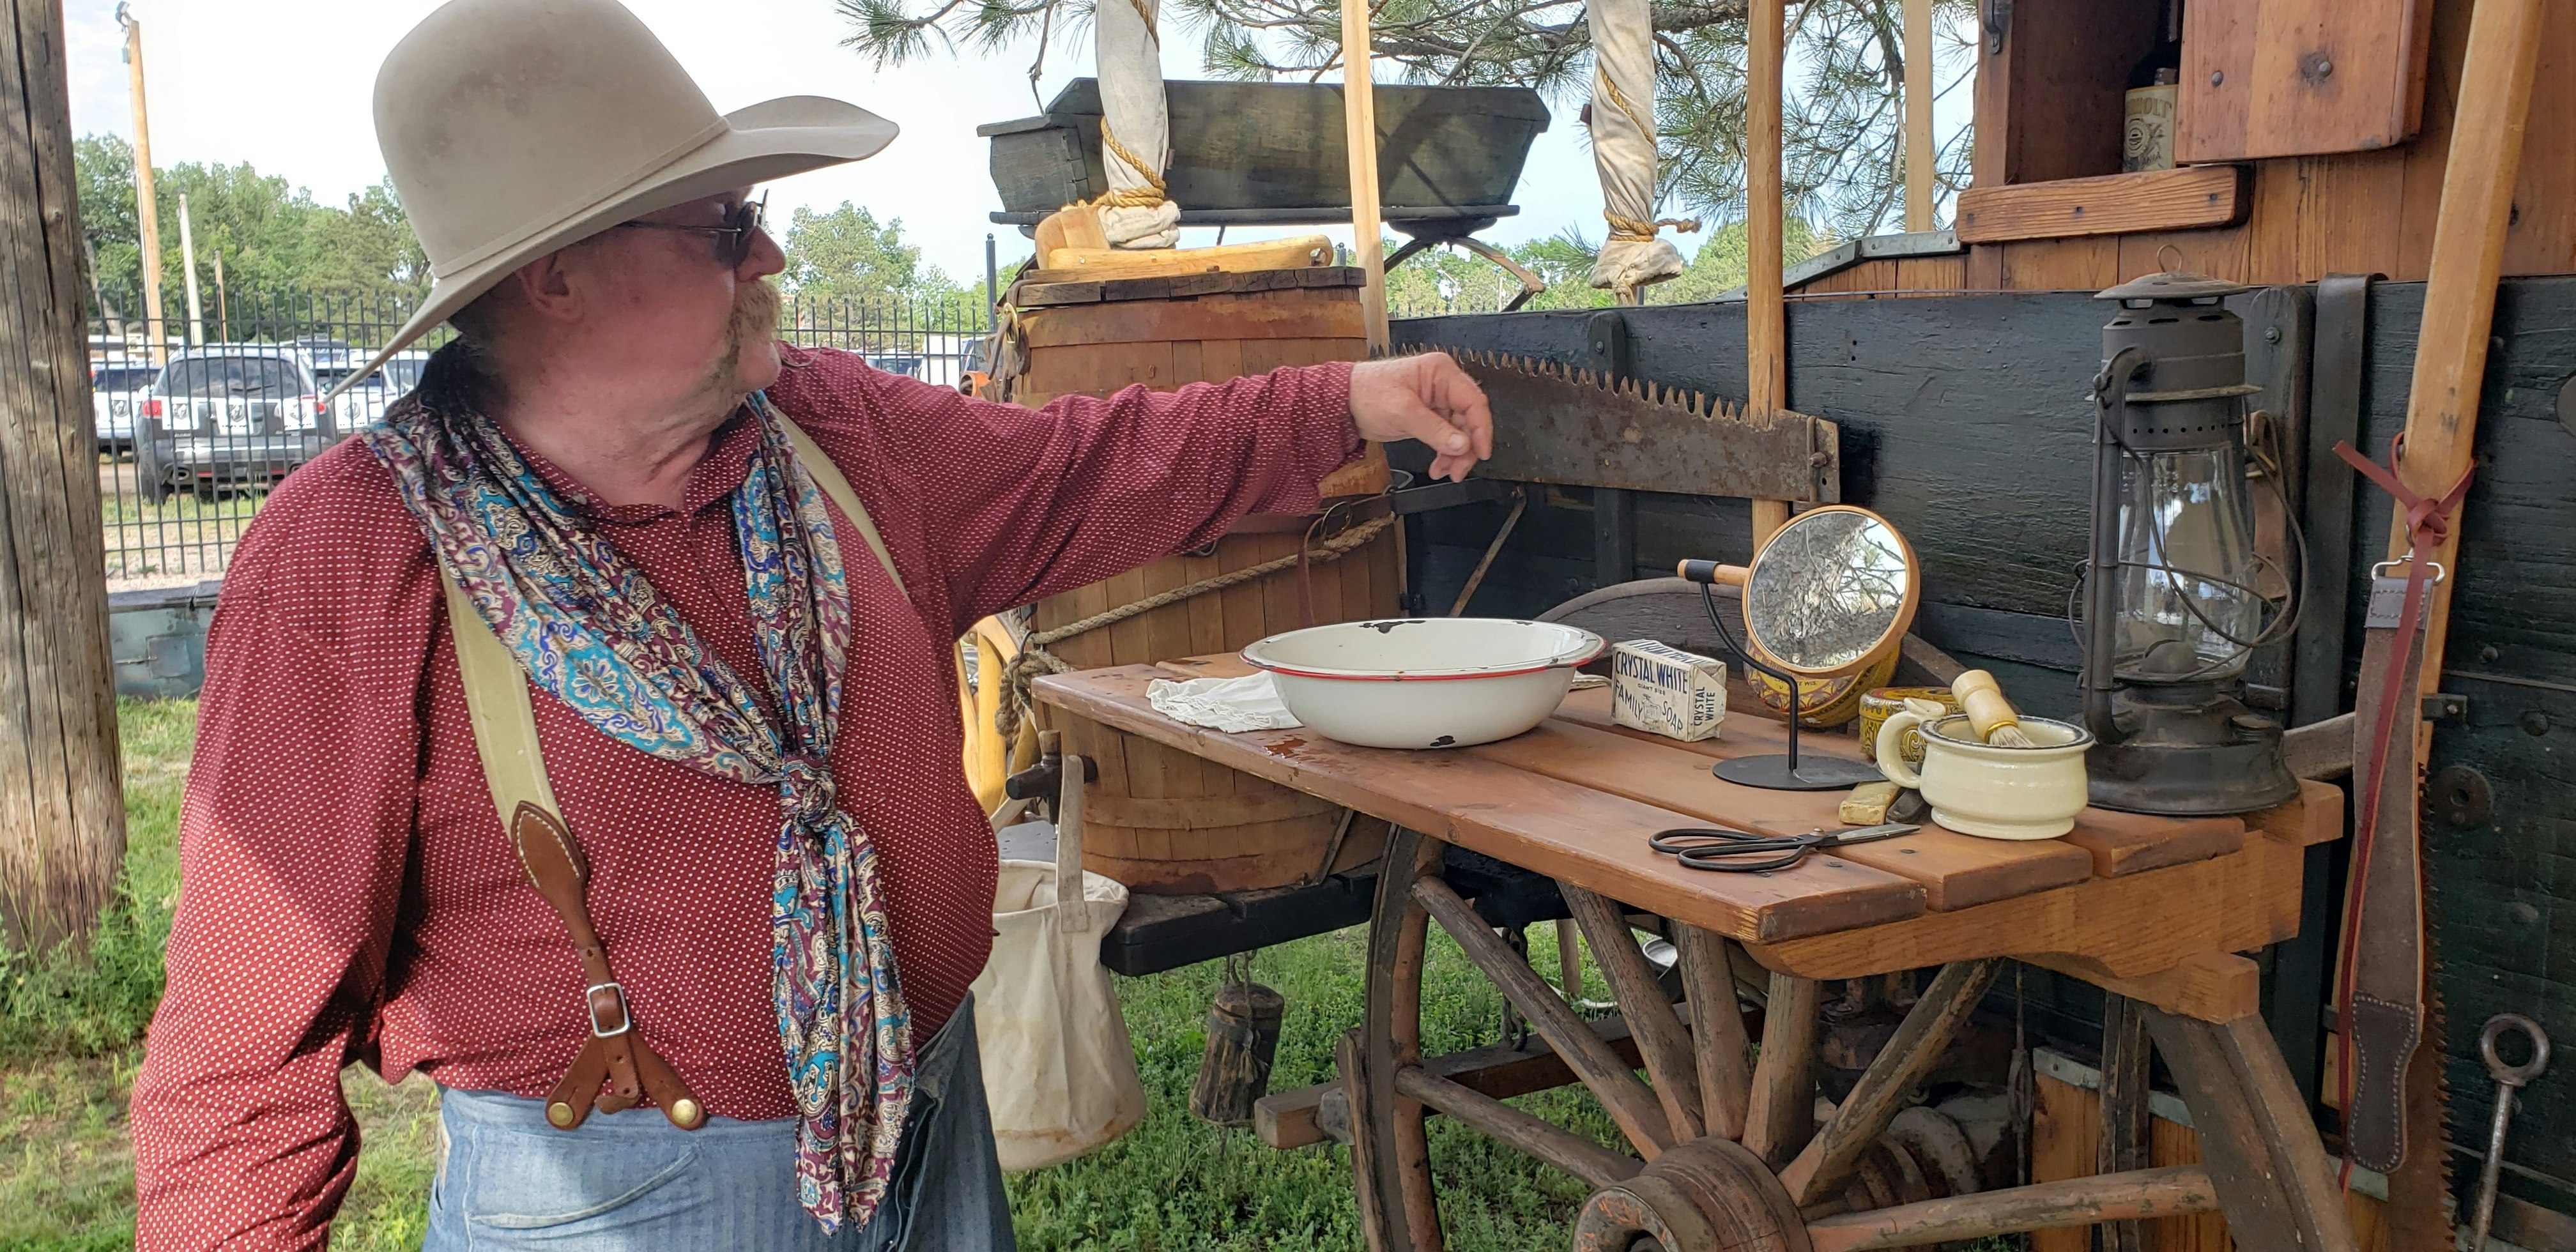 Chuckwagons weren't only about cooking. Cooks, or cookies as they were called, also offered a range of other services like barbering and doctoring.